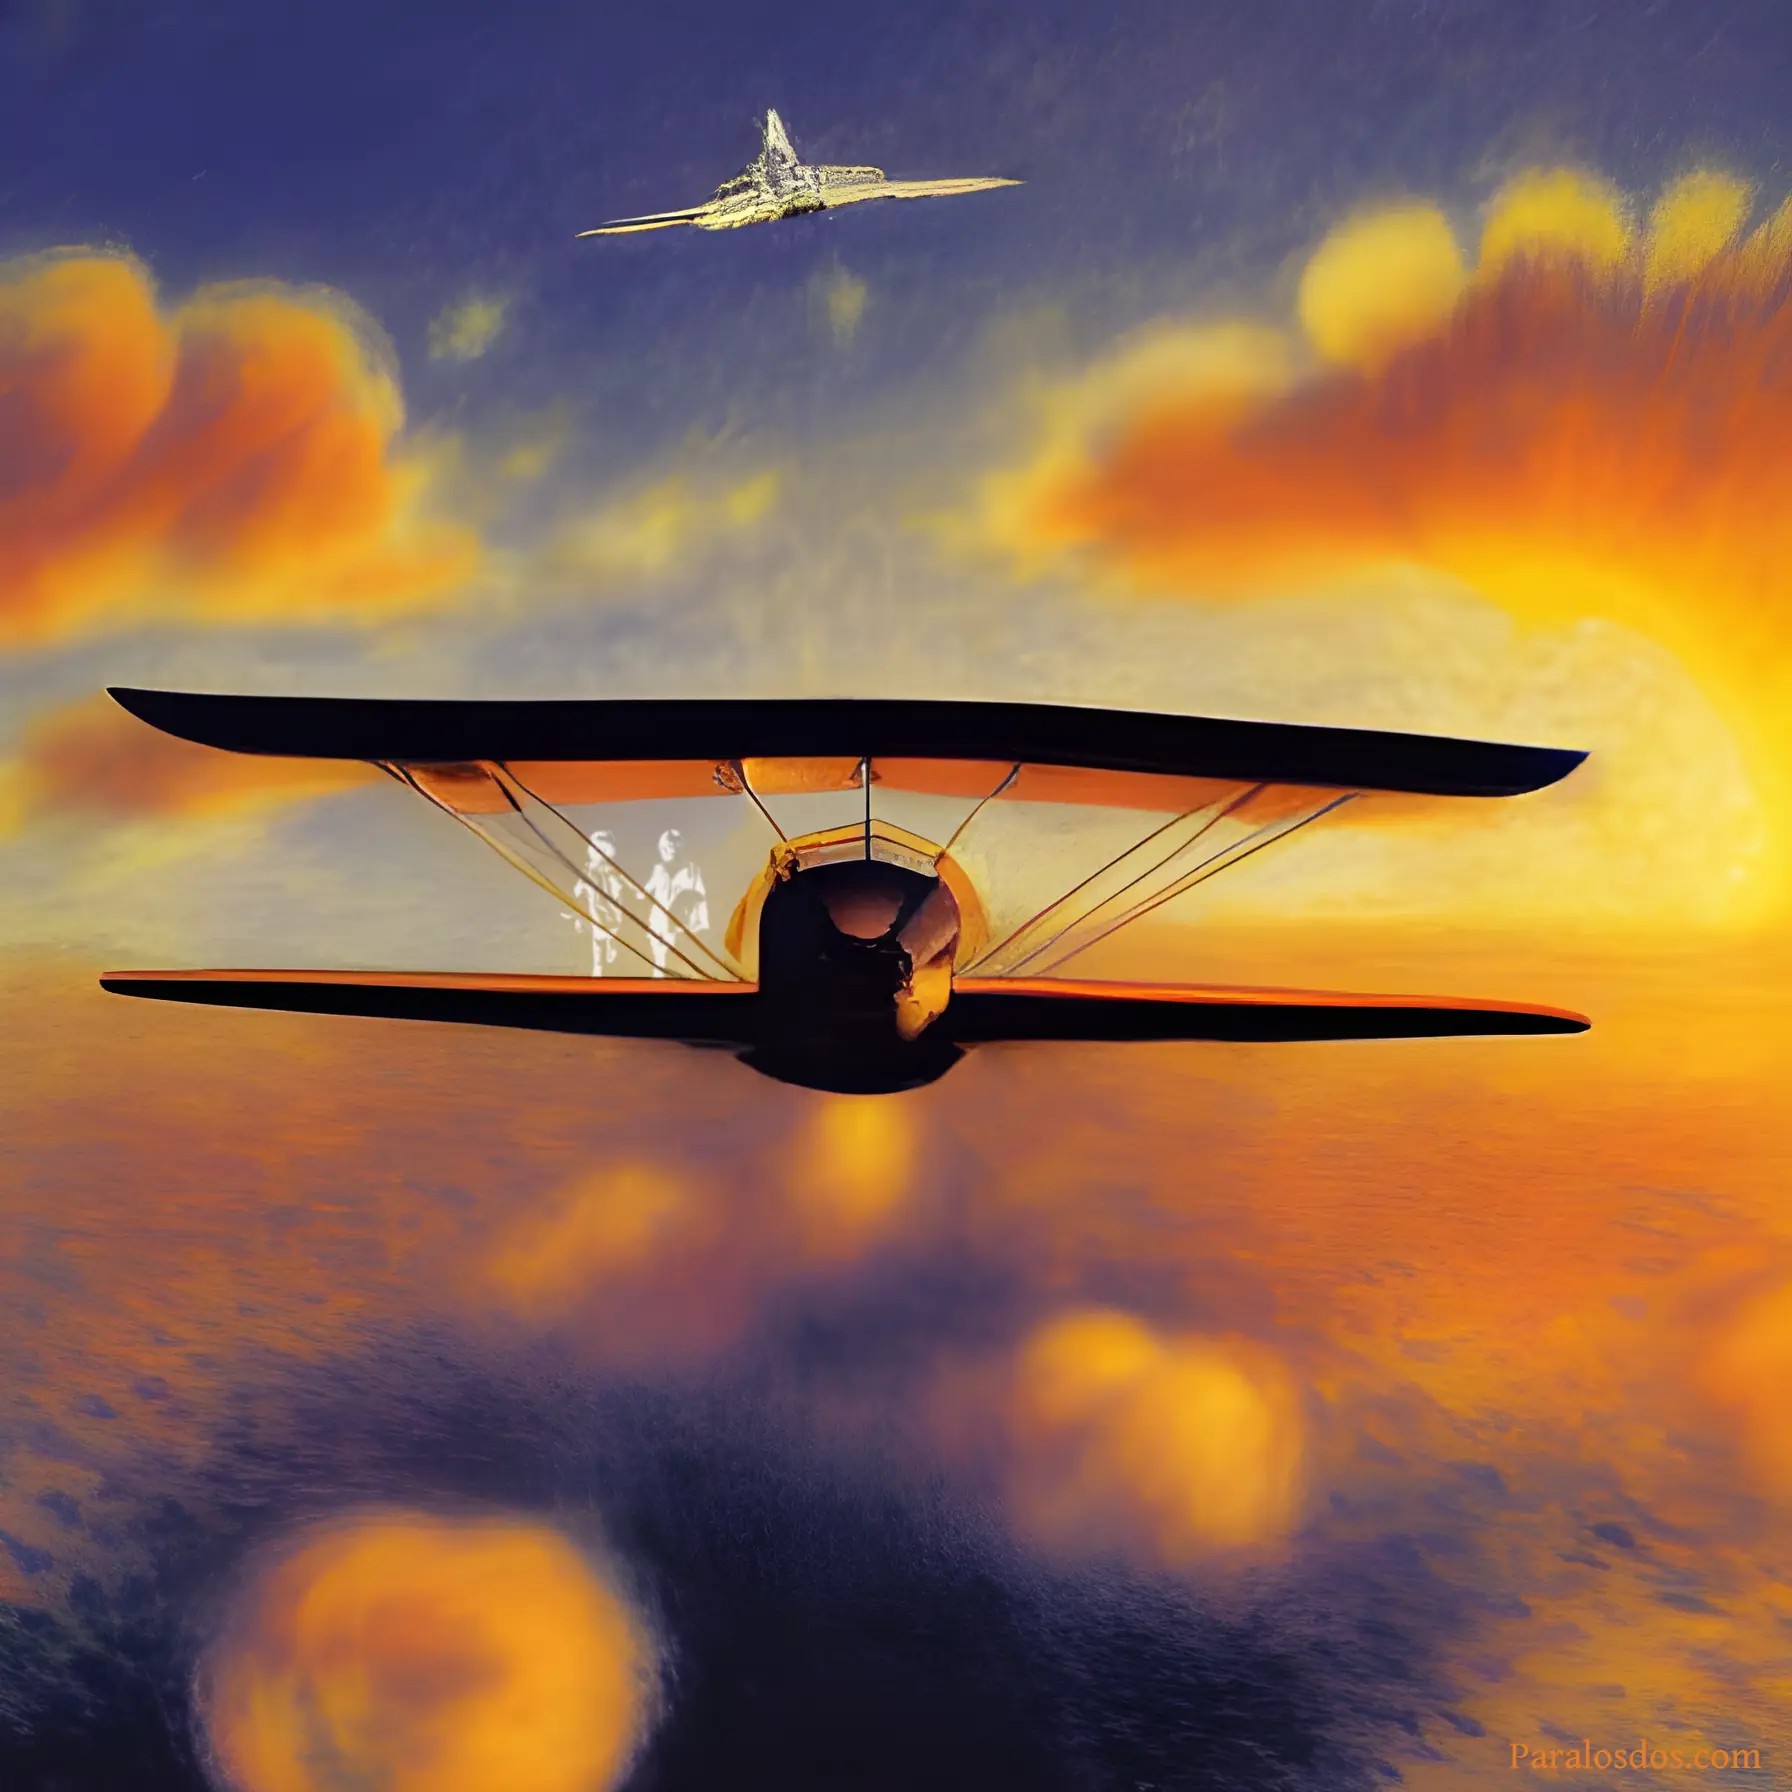 An artistic rendering of an old biplane in the foreground with a newer fighter plane in the background.